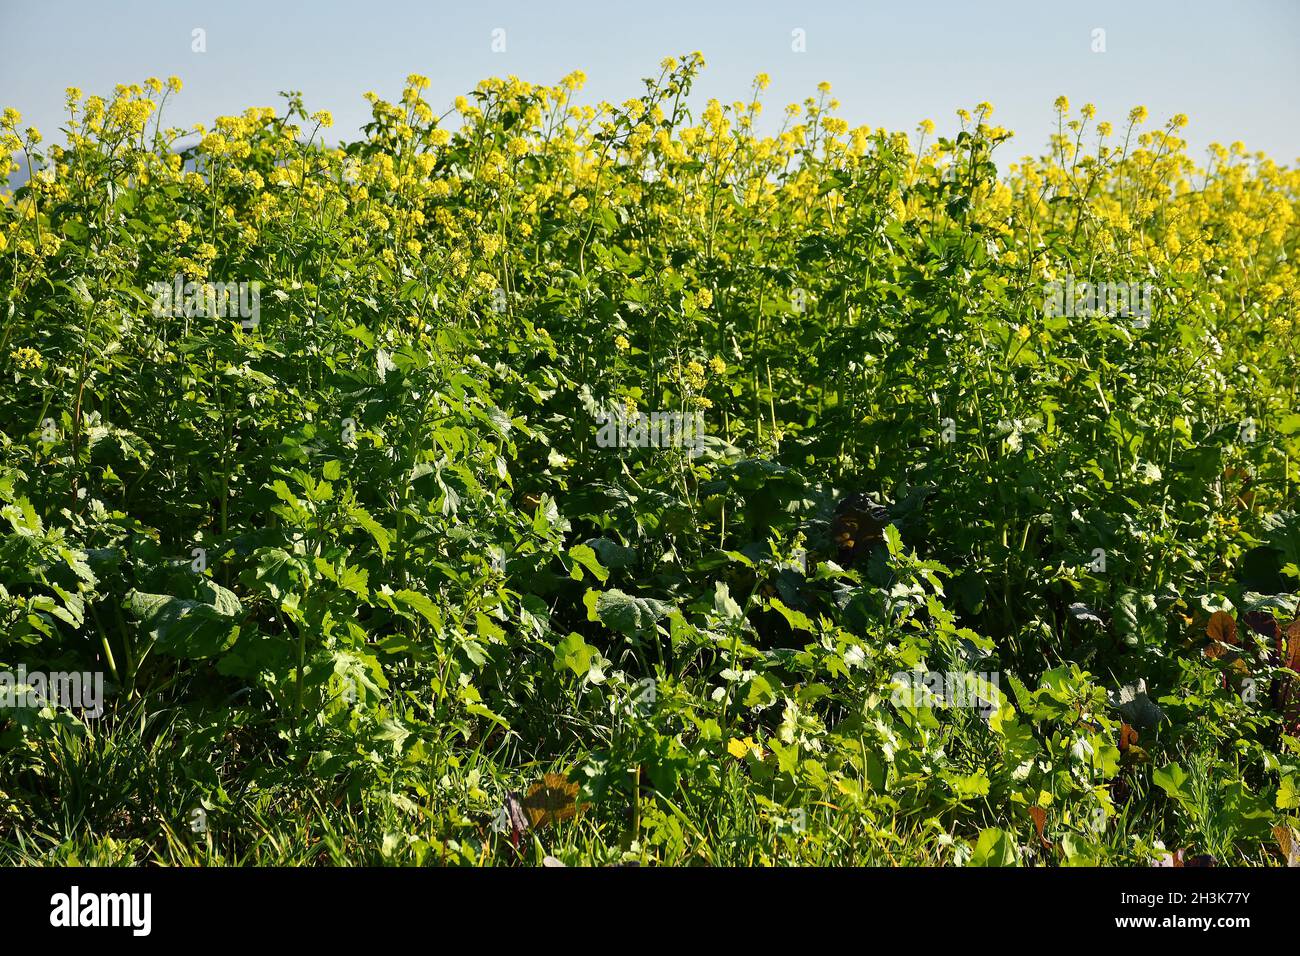 mustard, green manure, cultivation in autumn Stock Photo